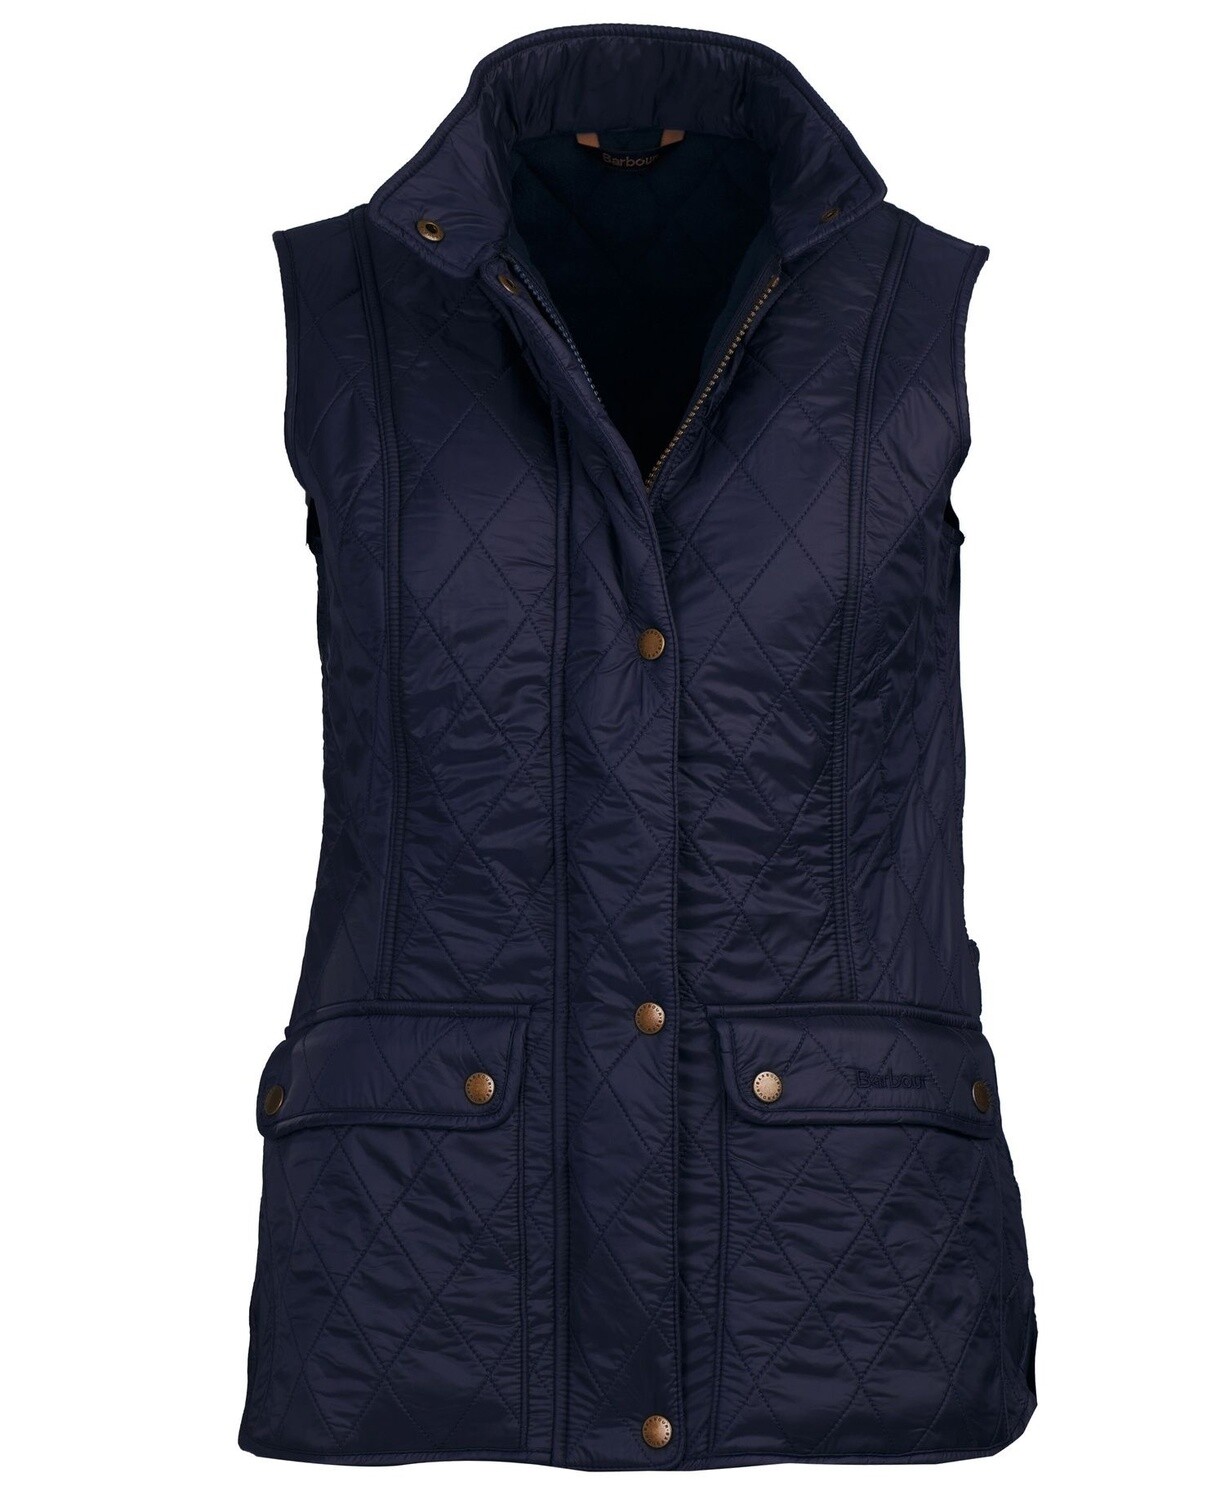 Barbour Wray Gilet - Navy